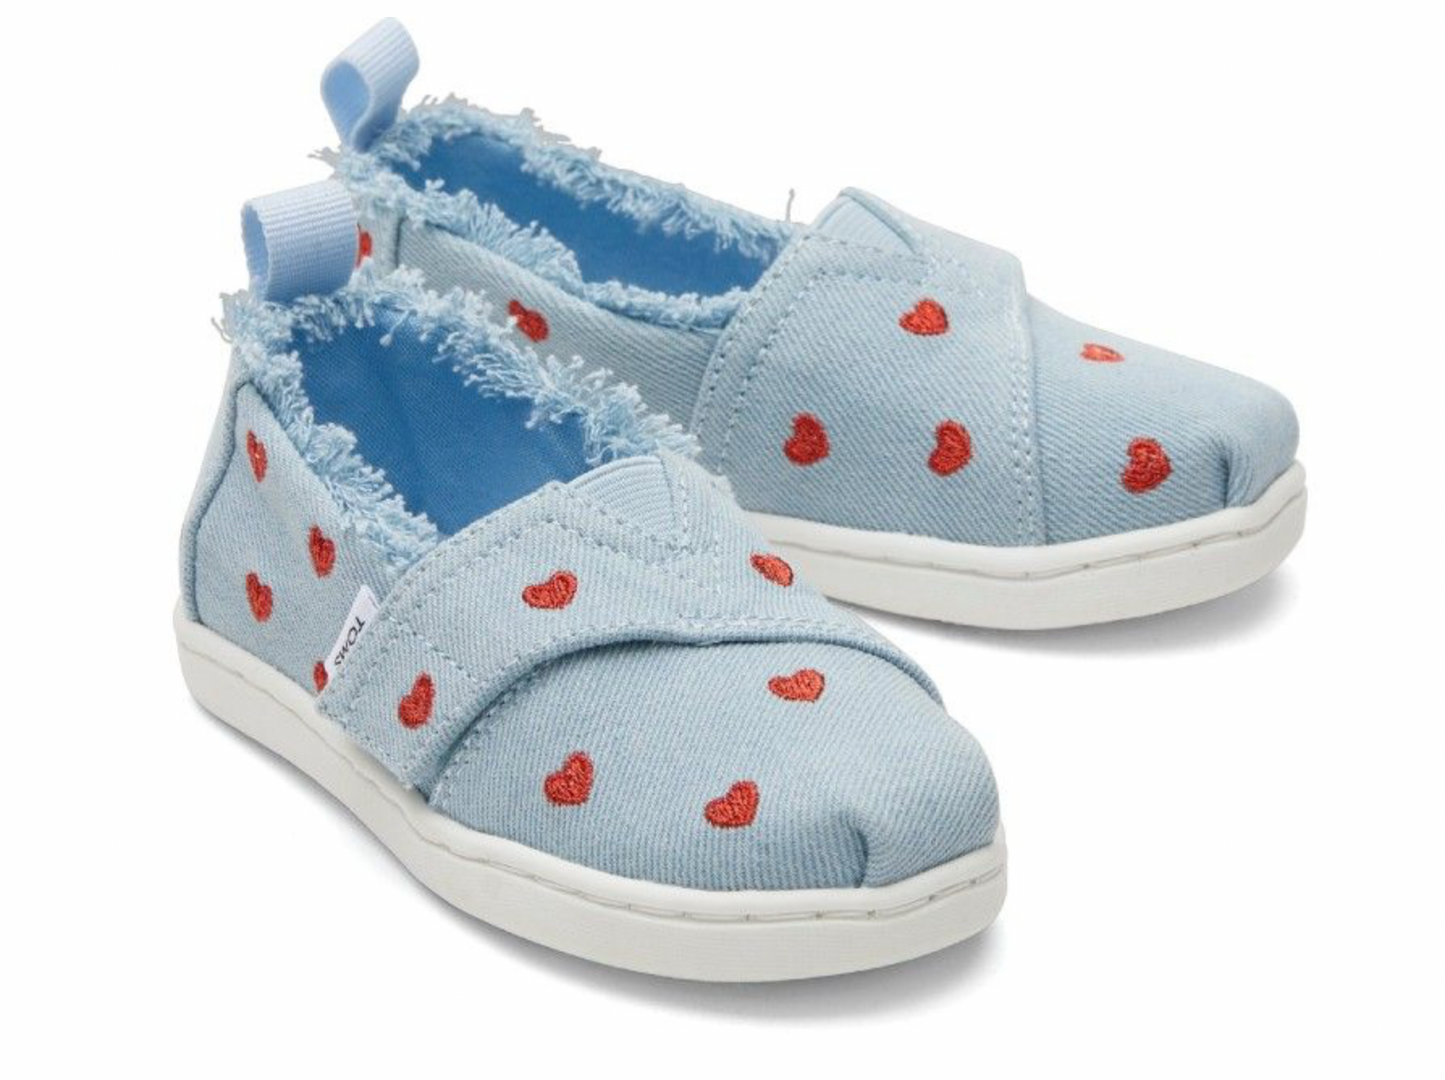 TOMS TINY Pastel Blue Washed Denim / Metallic Embroidered Hearts